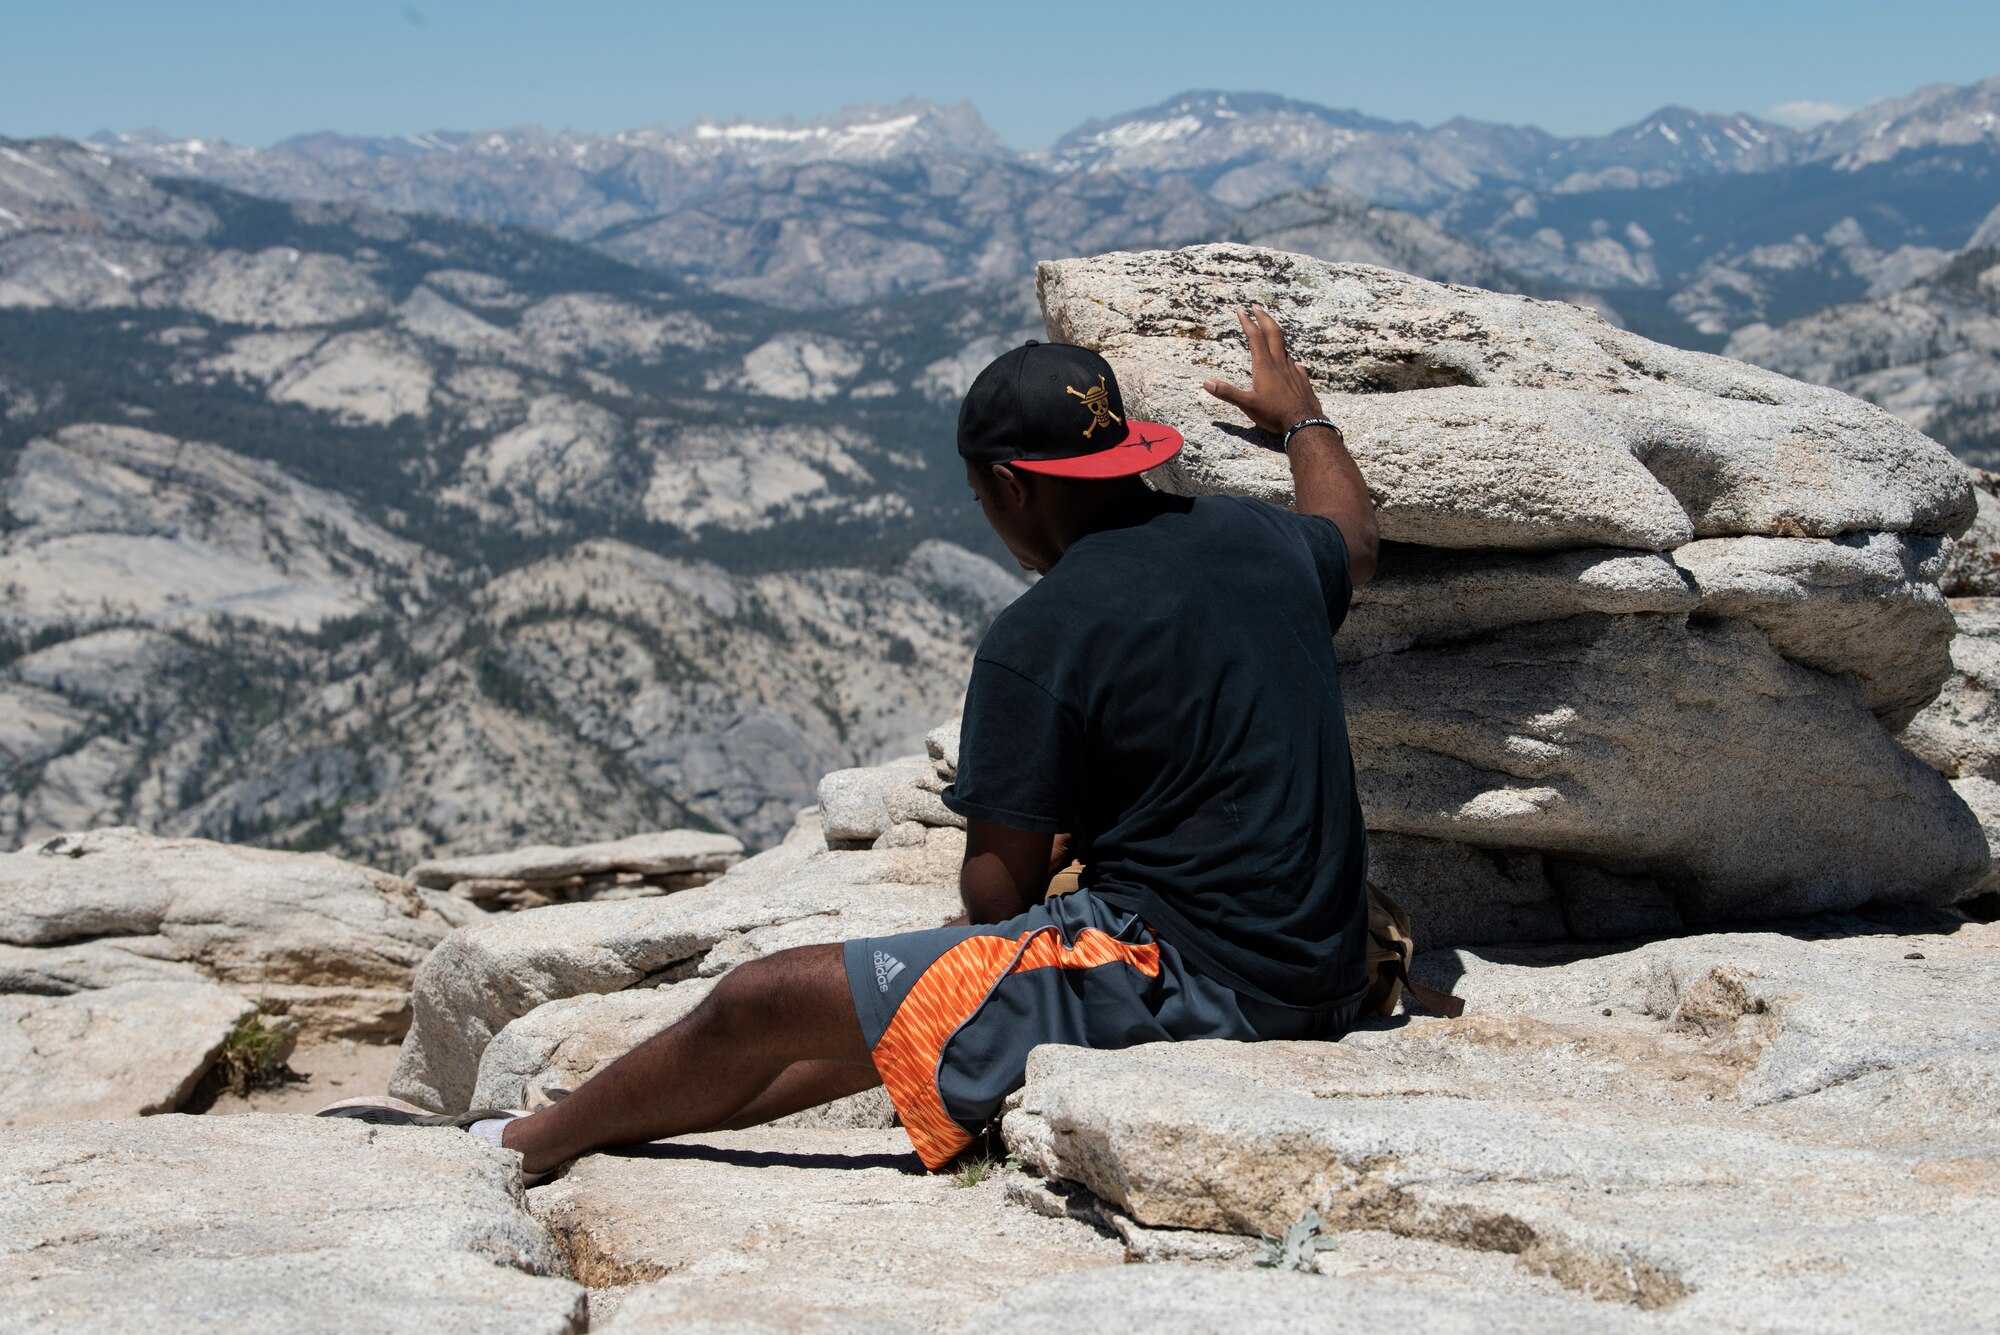 U.S. Air Force Capt. Ayodeji Alaketu, 60th Medical Operations Squadron family resident physician, enjoys the view from the summit of Cloud’s Rest July 13, 2019, at Yosemite National Park, California. Alaketu and 41 other Airmen from Travis Air Force Base, California, hiked to Cloud’s Rest covering 14.57 miles as they climbed to 9,926 feet above sea level. The hike was organized to enhance the Airmen’s physical, mental and spiritual resiliency. (U.S. Air Fore photo by Tech. Sgt. James Hodgman)